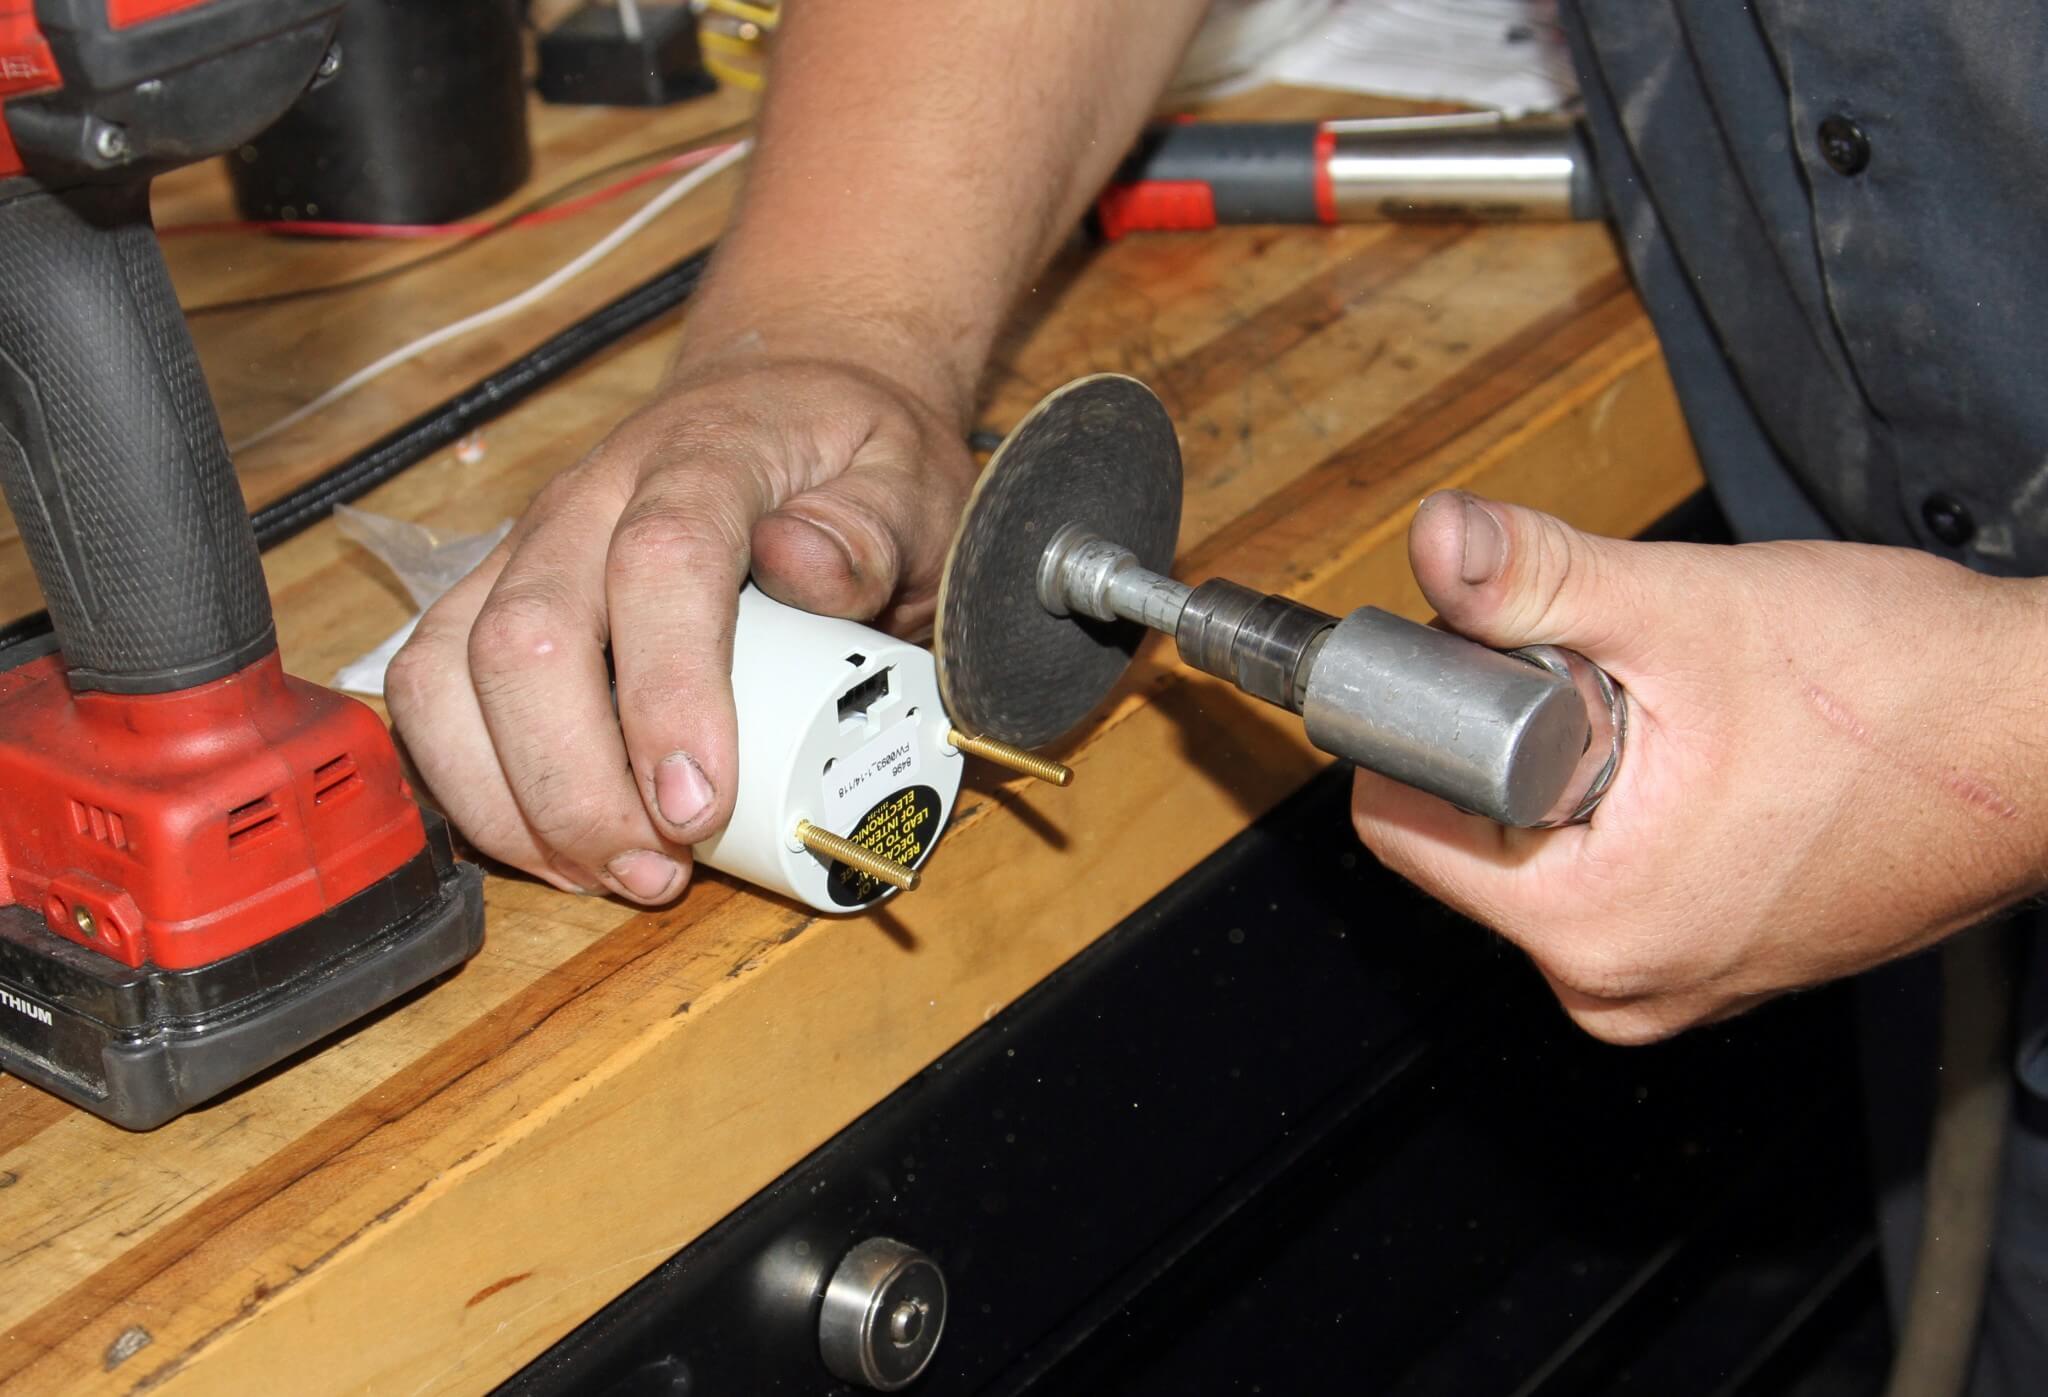 6. Carter cuts off the mounting studs from the backside of the gauge to fit the HPOP gauge in the steering column pod.